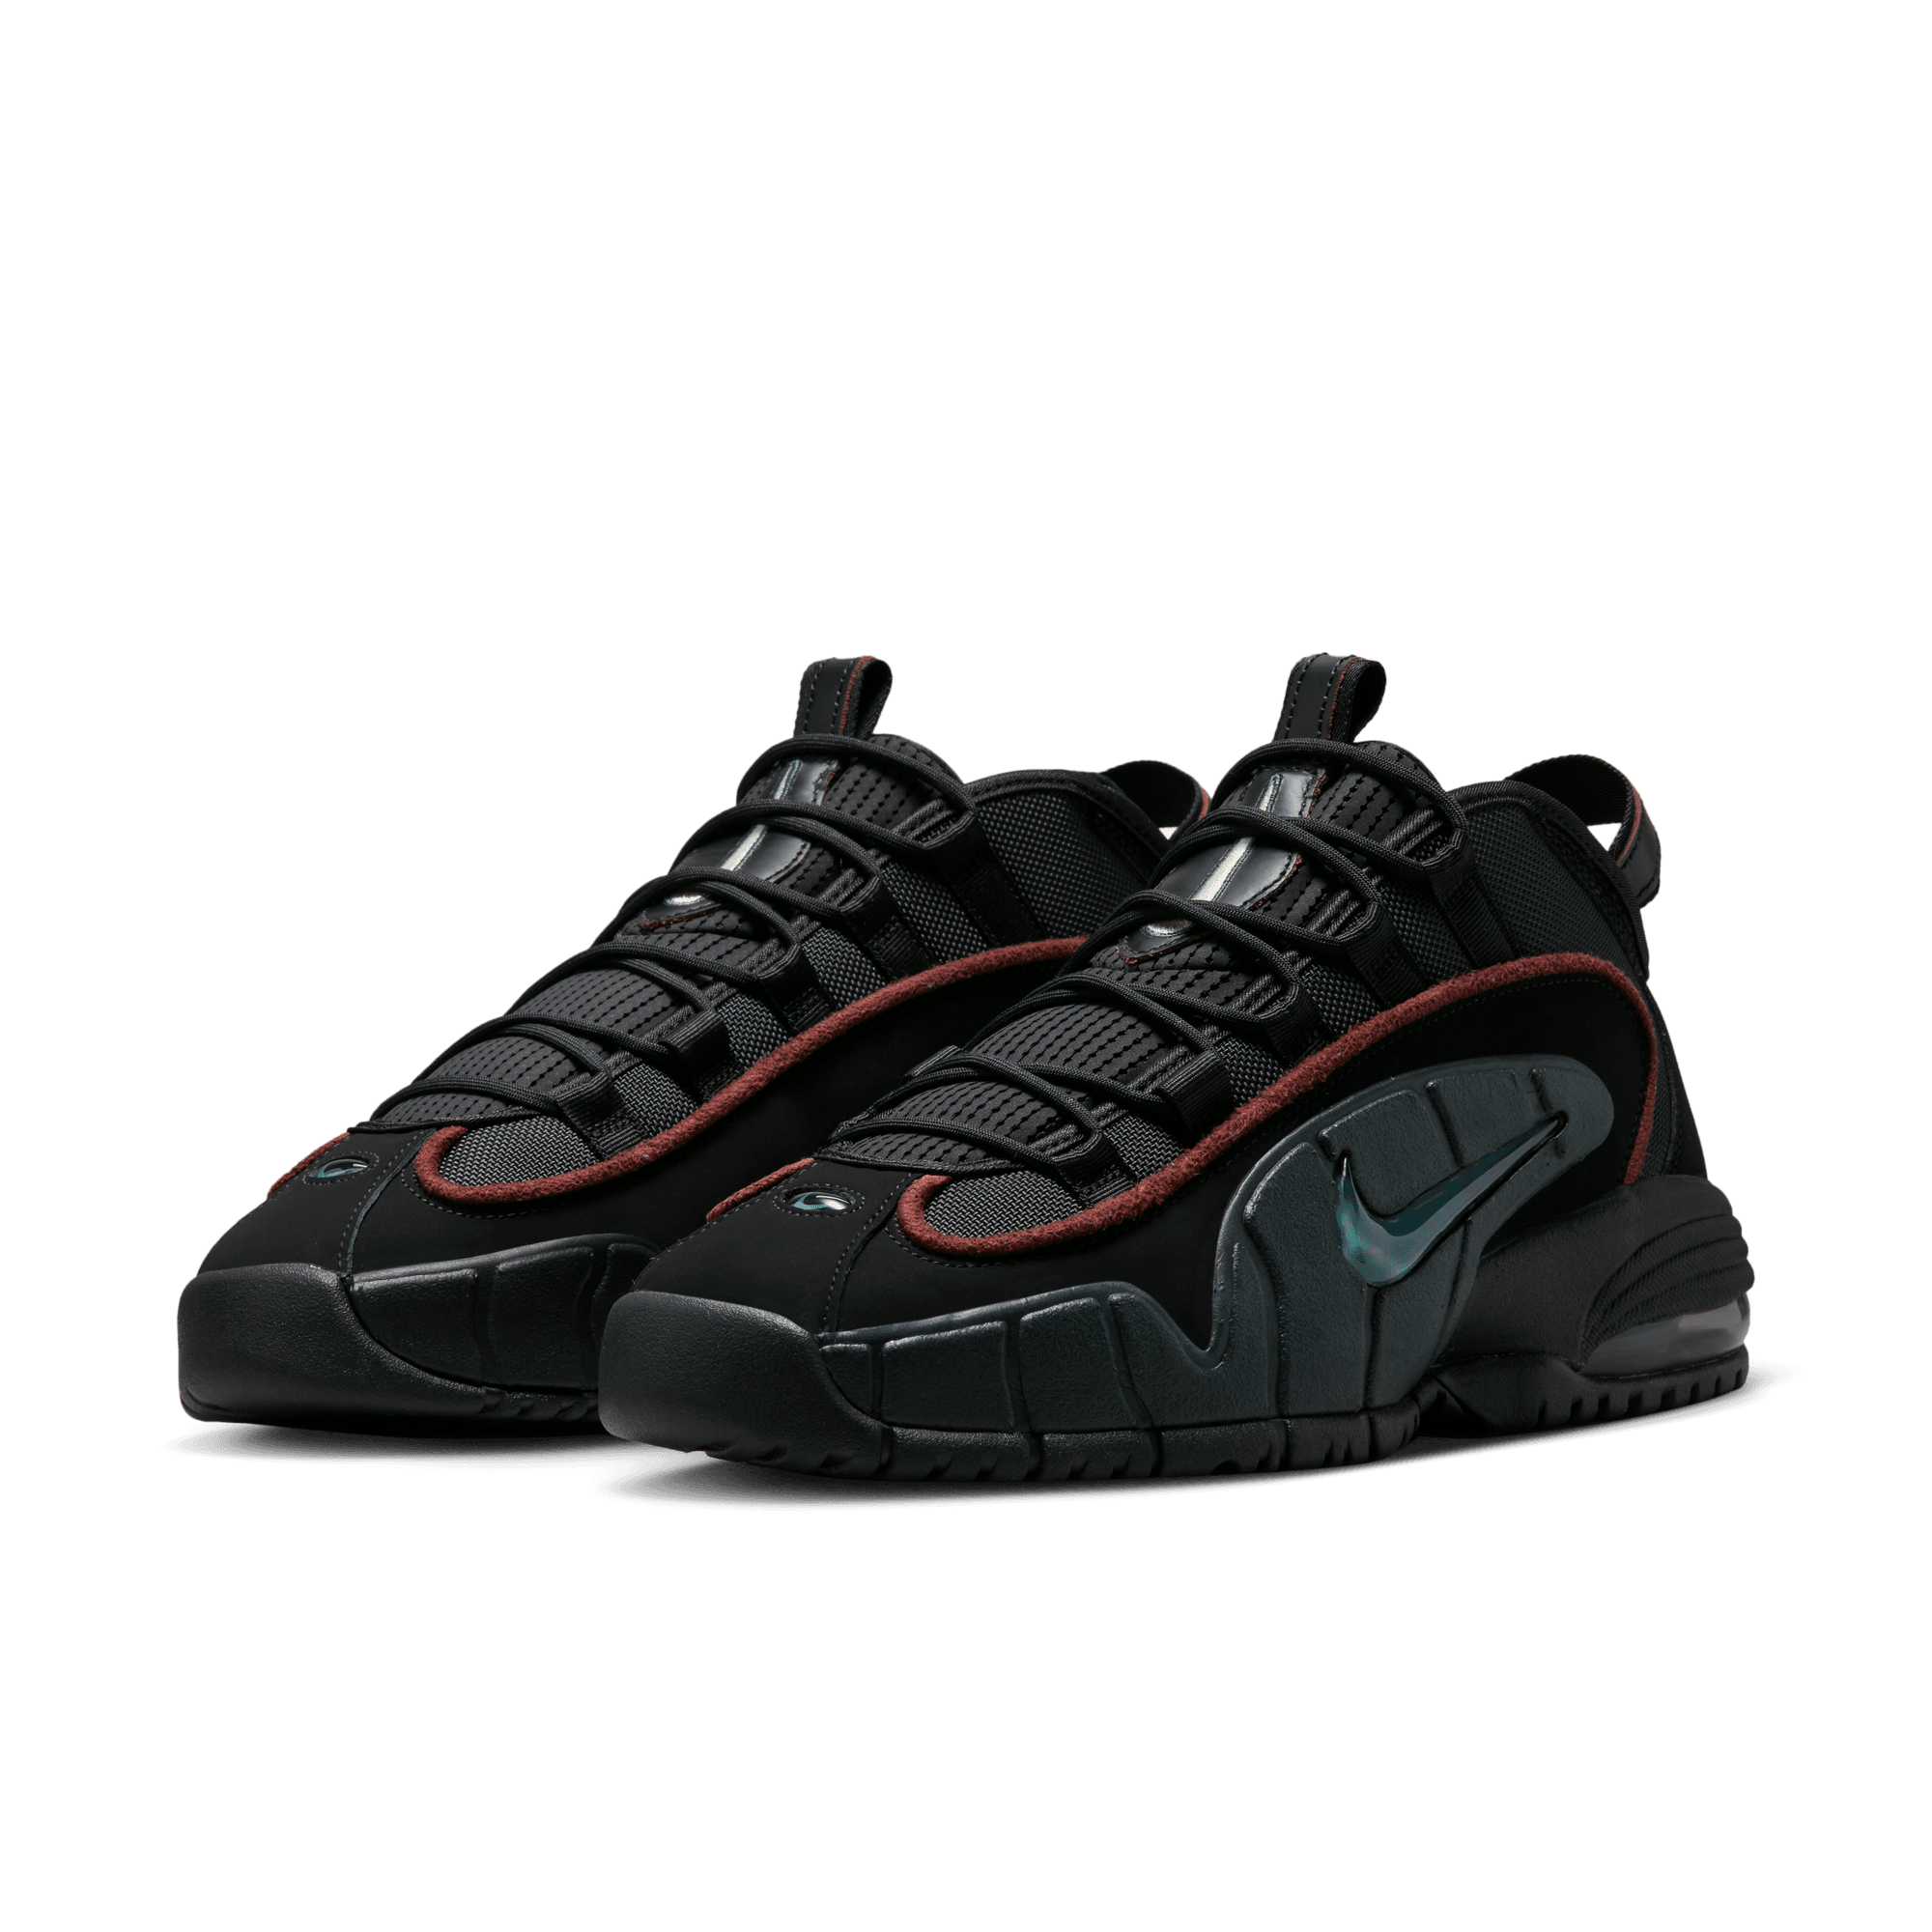 Nike Air Max Penny "Black Faded'